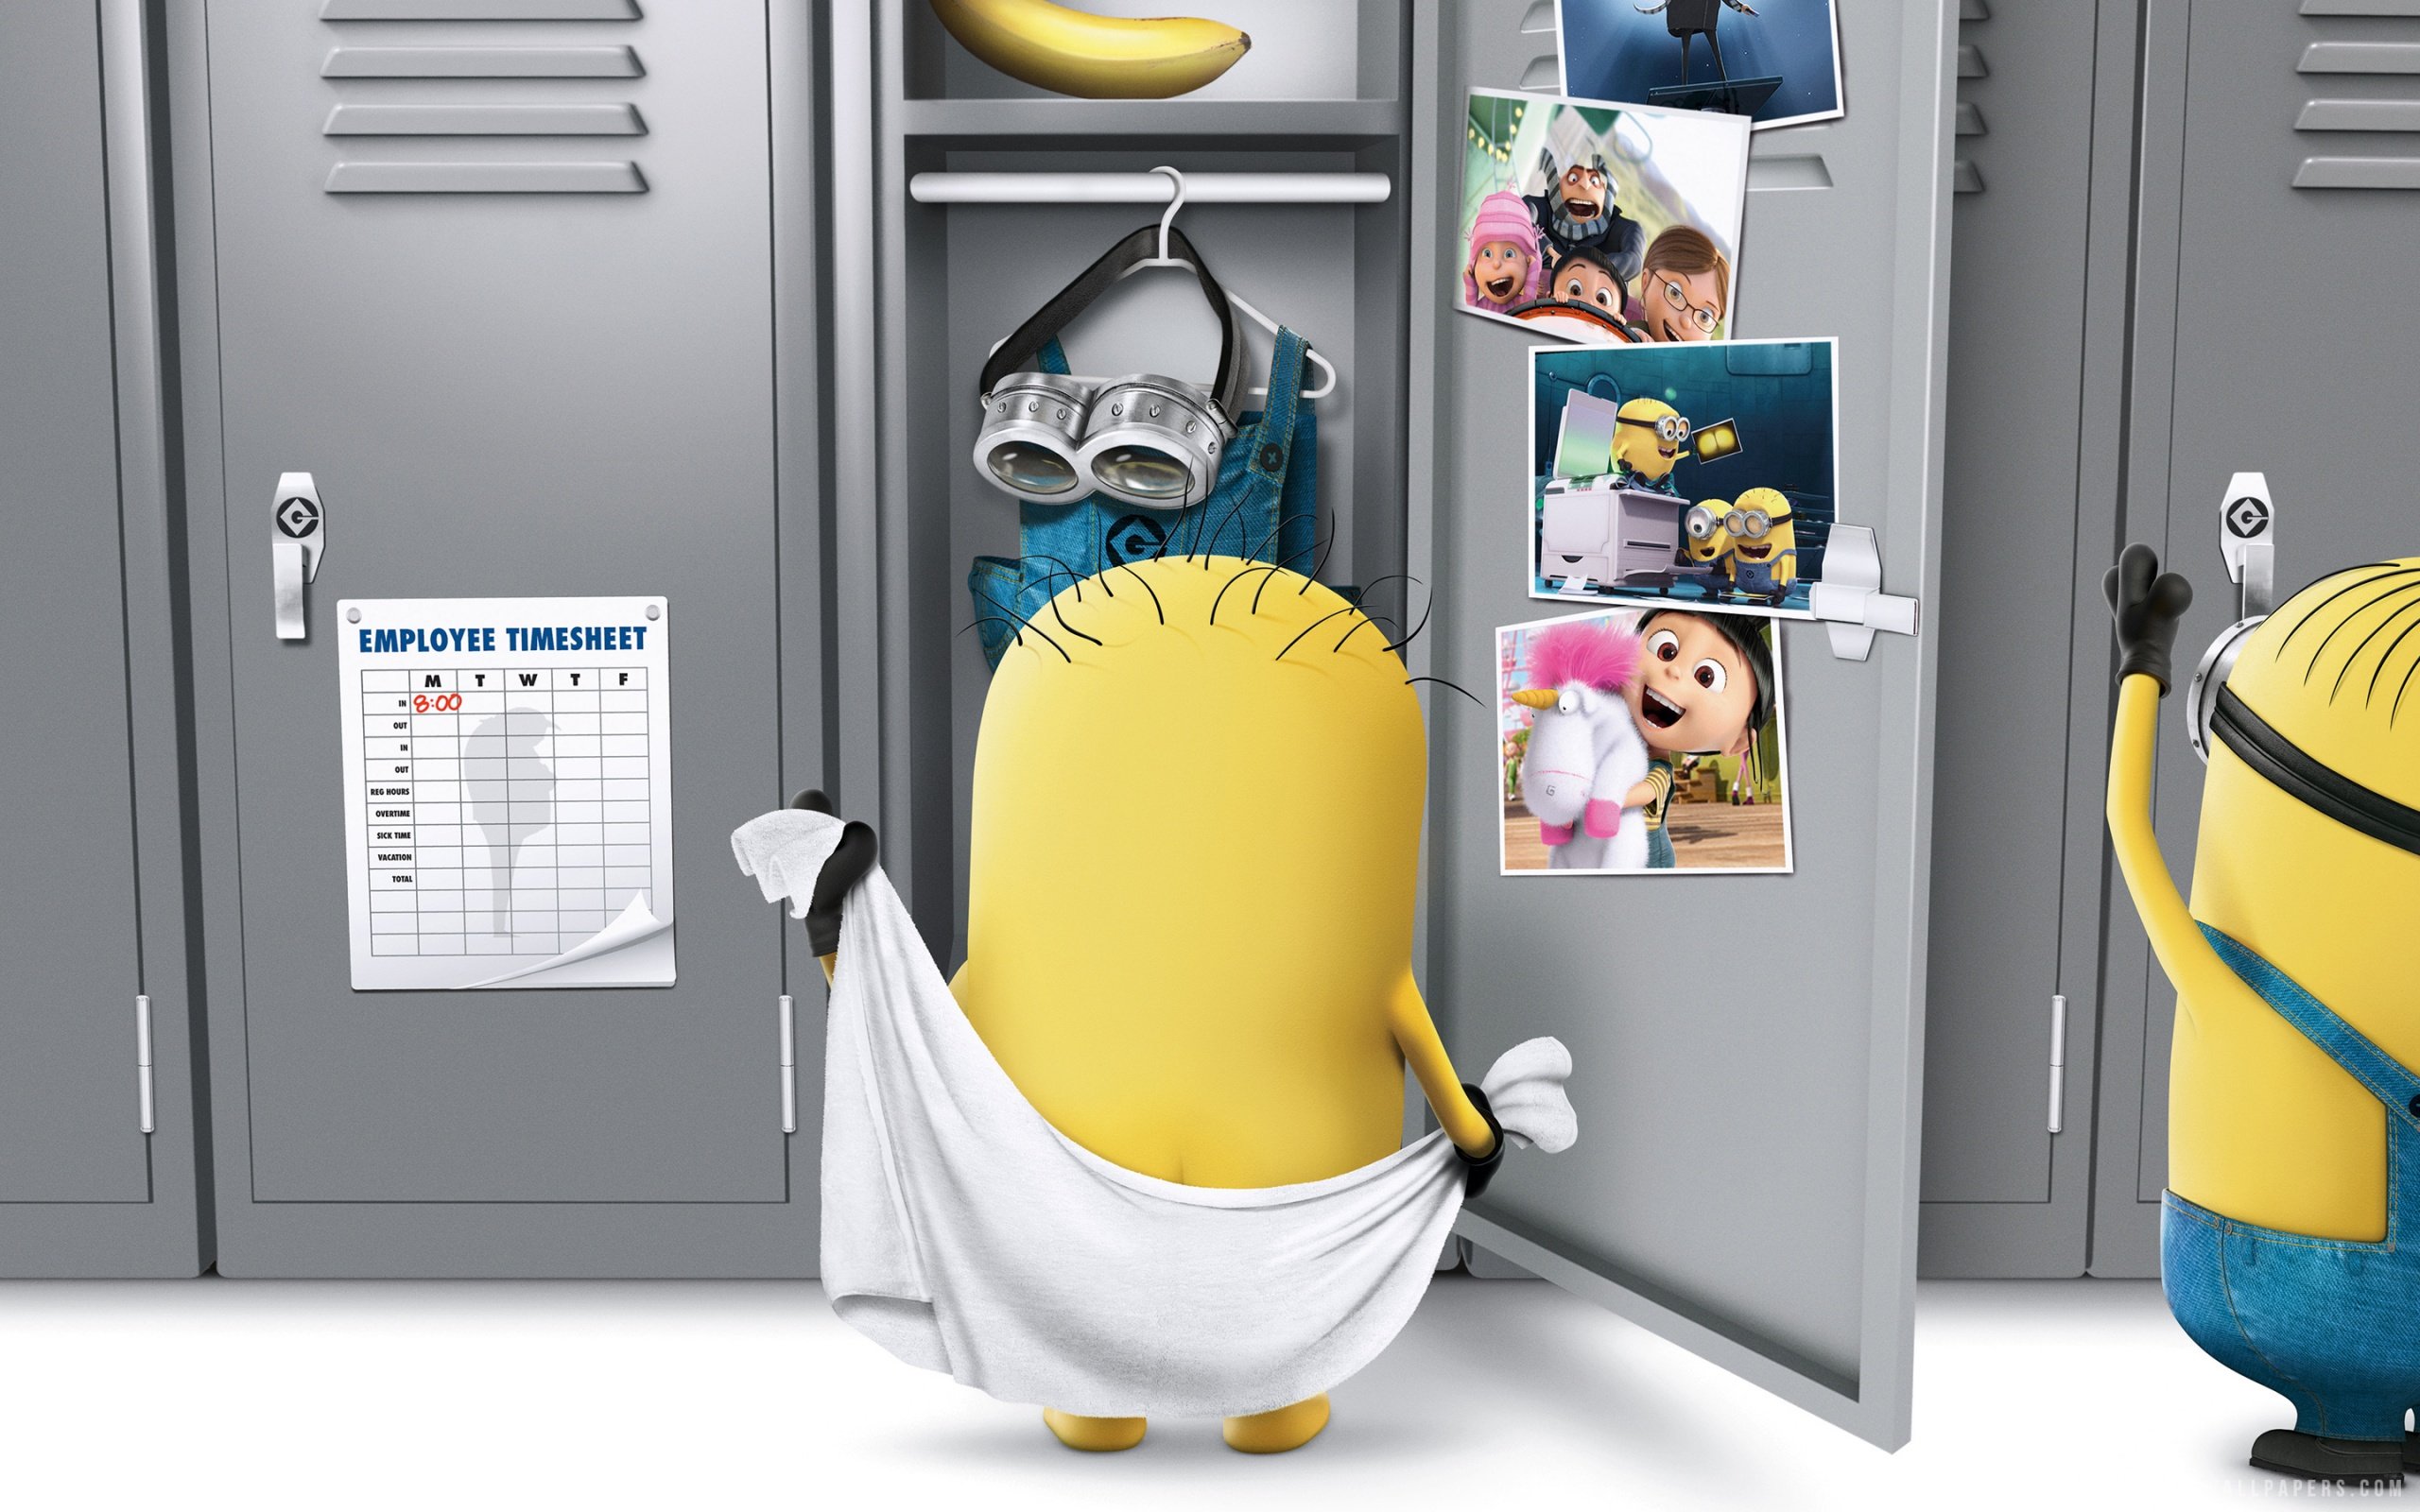 Despicable Me 2 Minions Pictures, Movie Wallpapers & Facebook Cover Photos